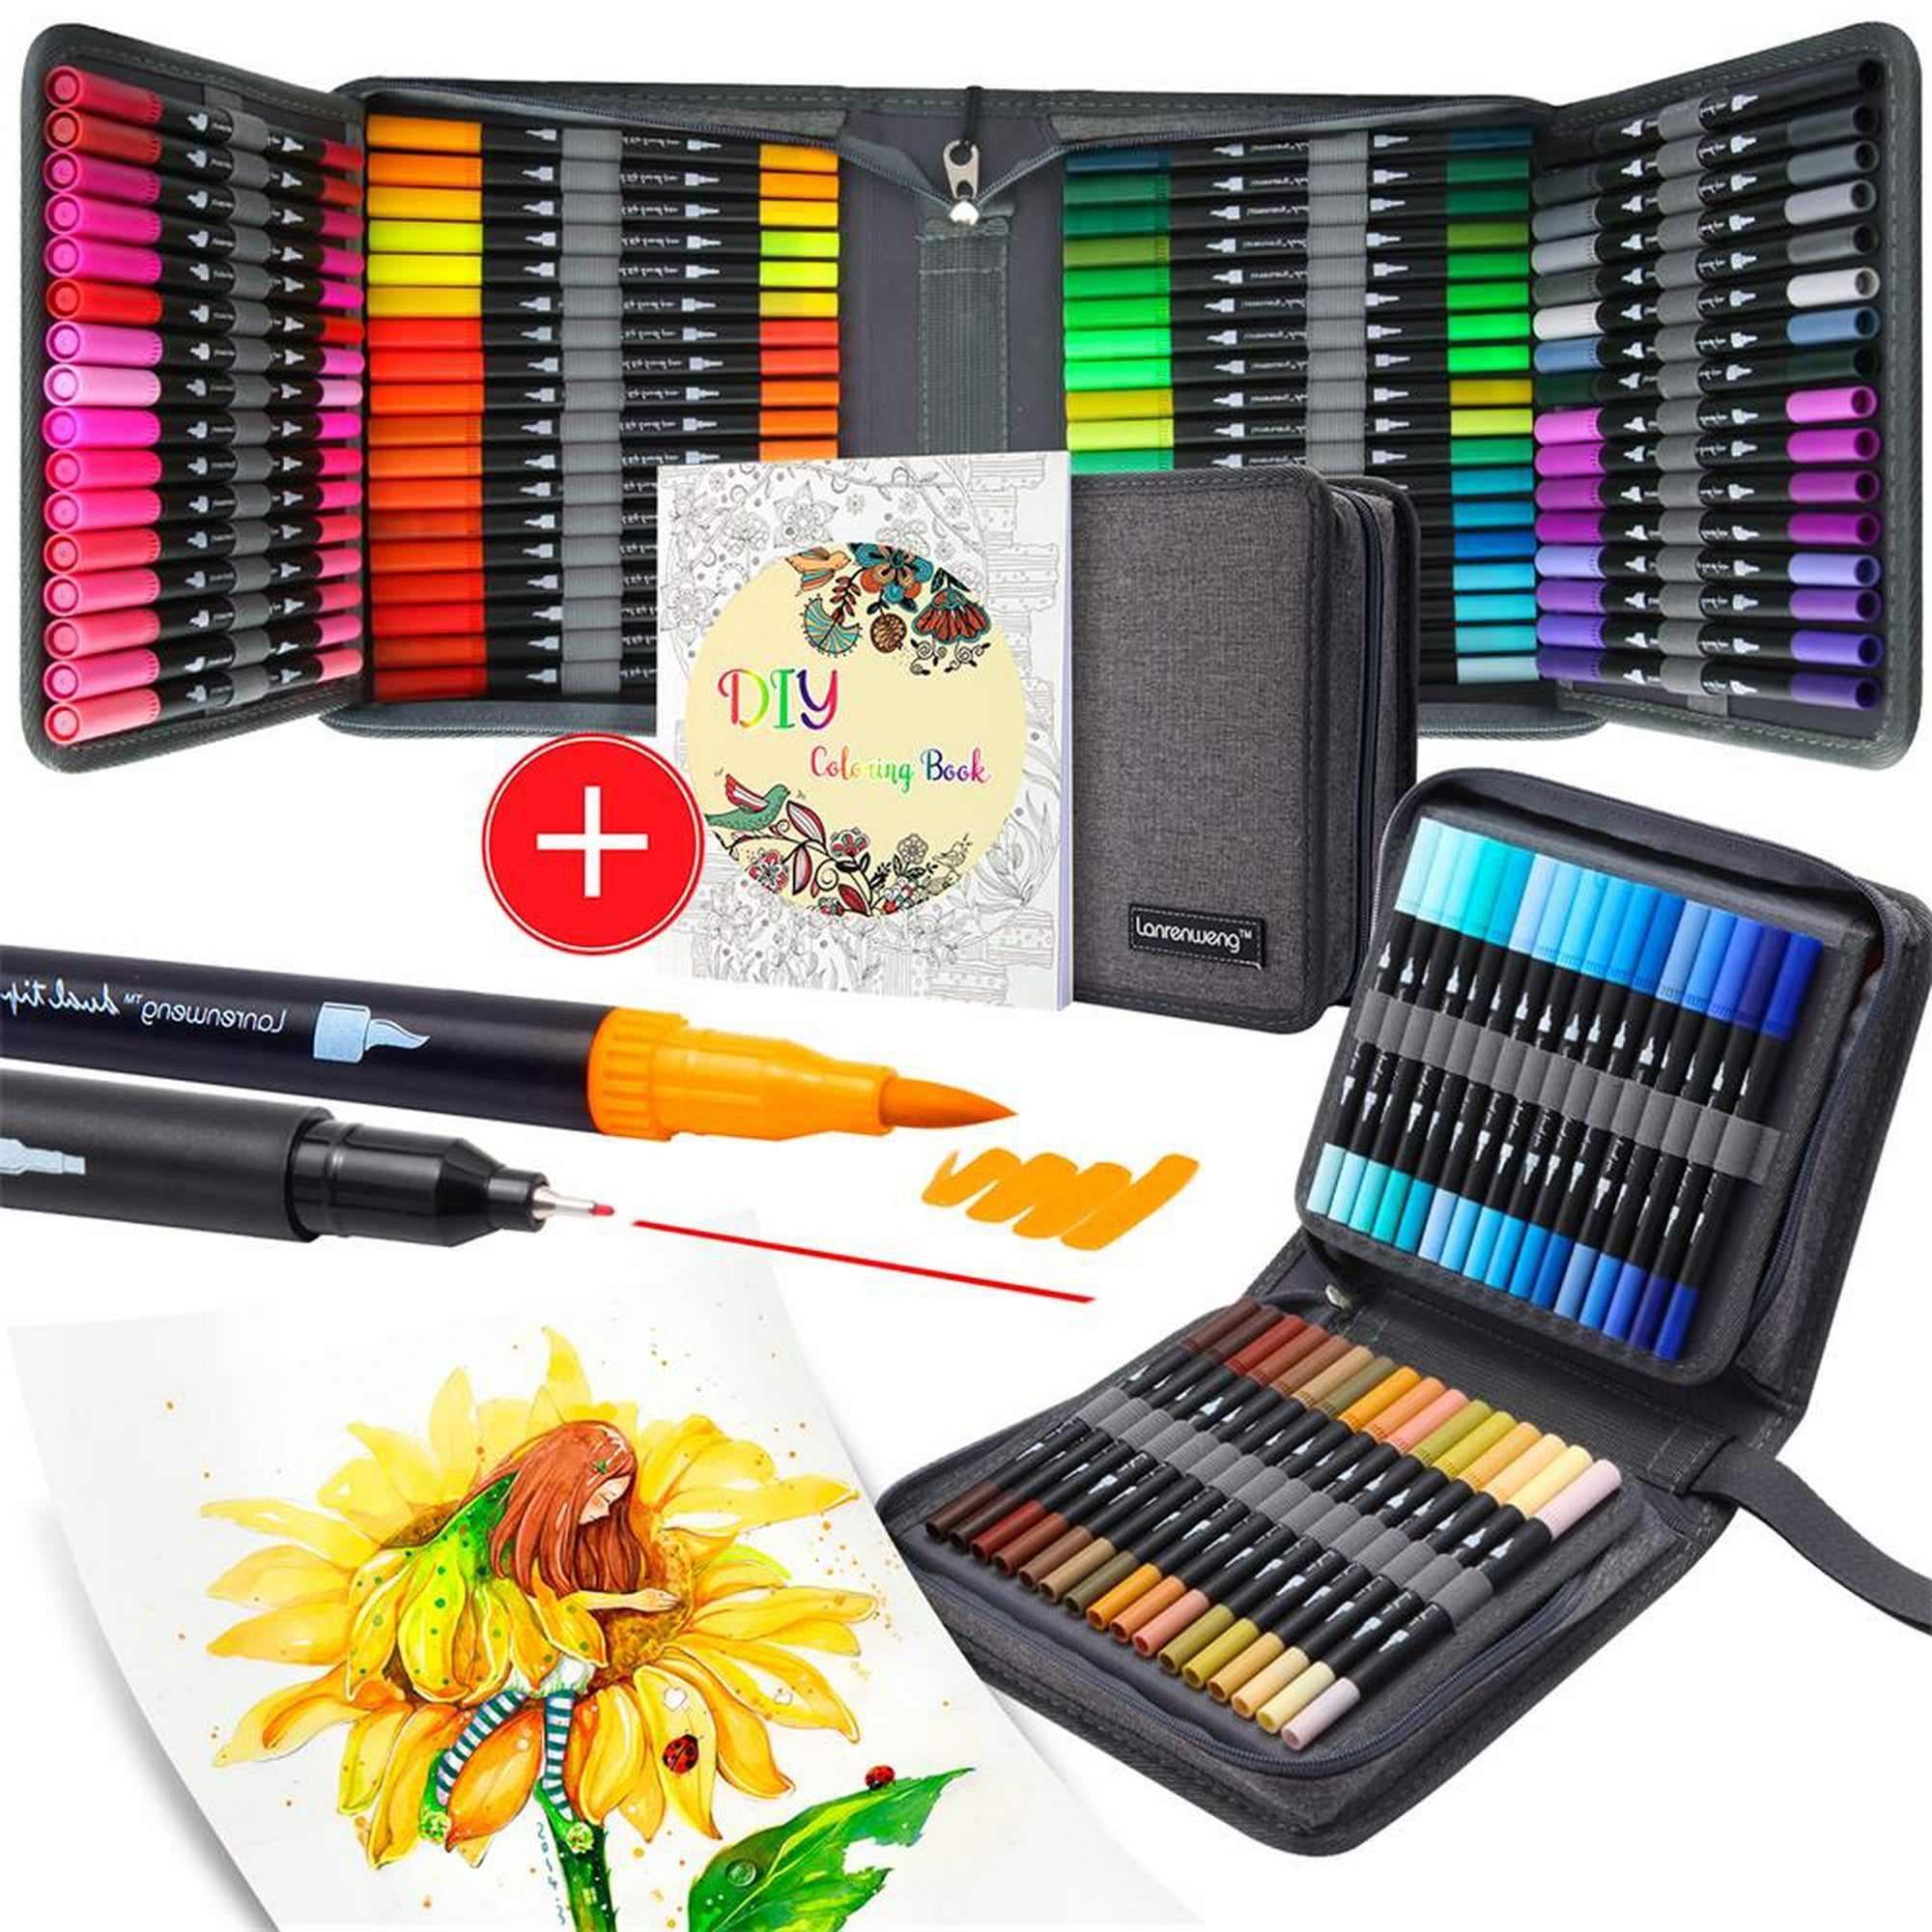 12-160 Colors Brush Pens Markers Set Dual Tips Fine Drawing Adult